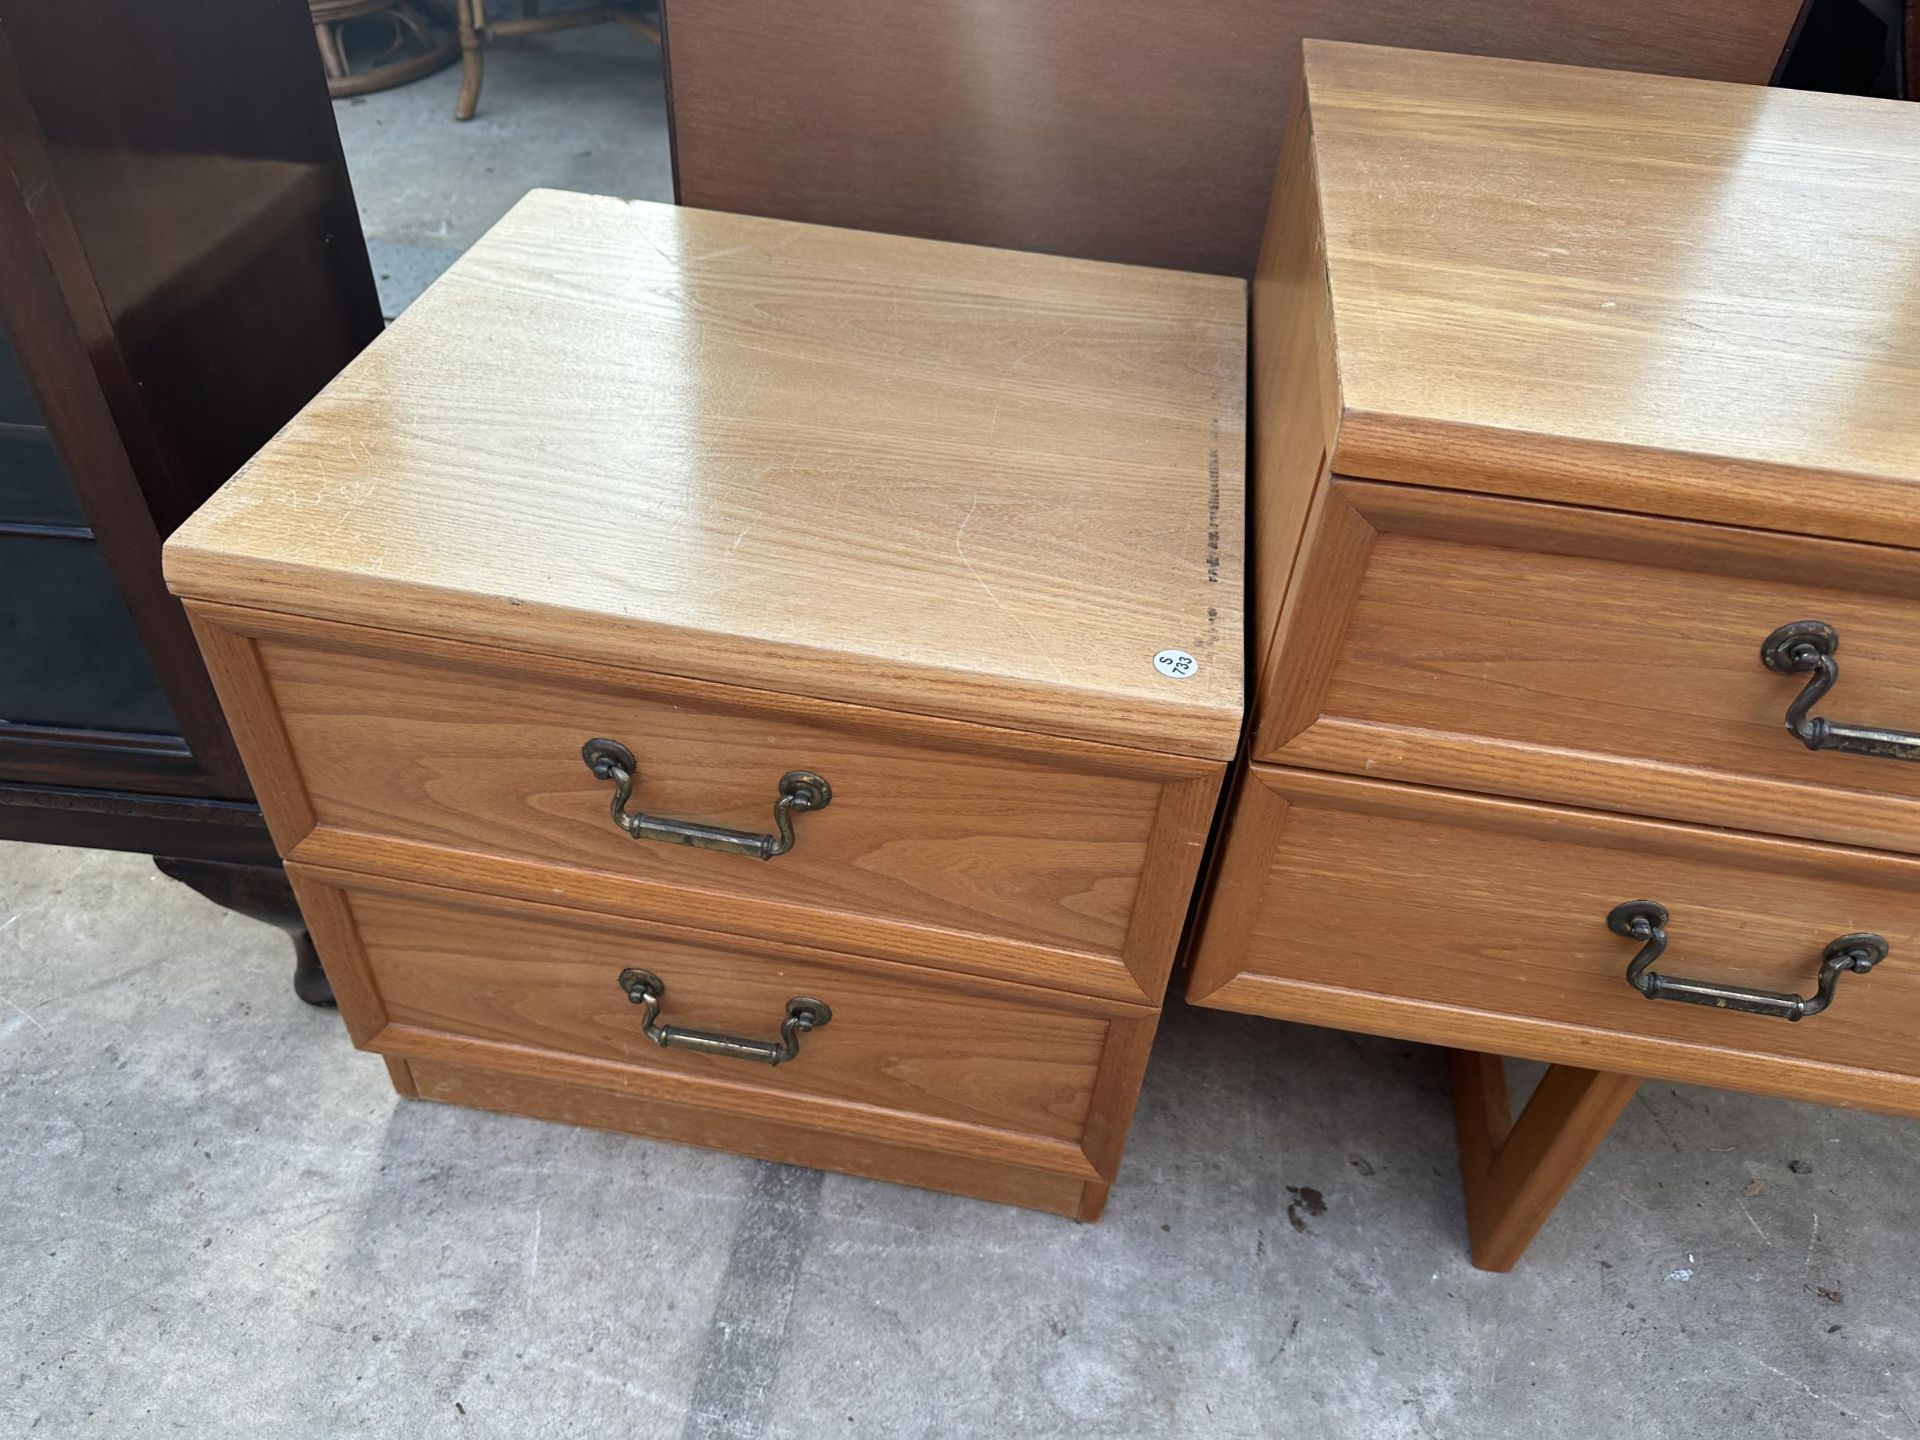 A G PLAN RETRO TEAK DRESSING TABLE 59" WIDE AND A PAIR OF MATCHING BEDSIDE CHESTS - Image 6 of 8